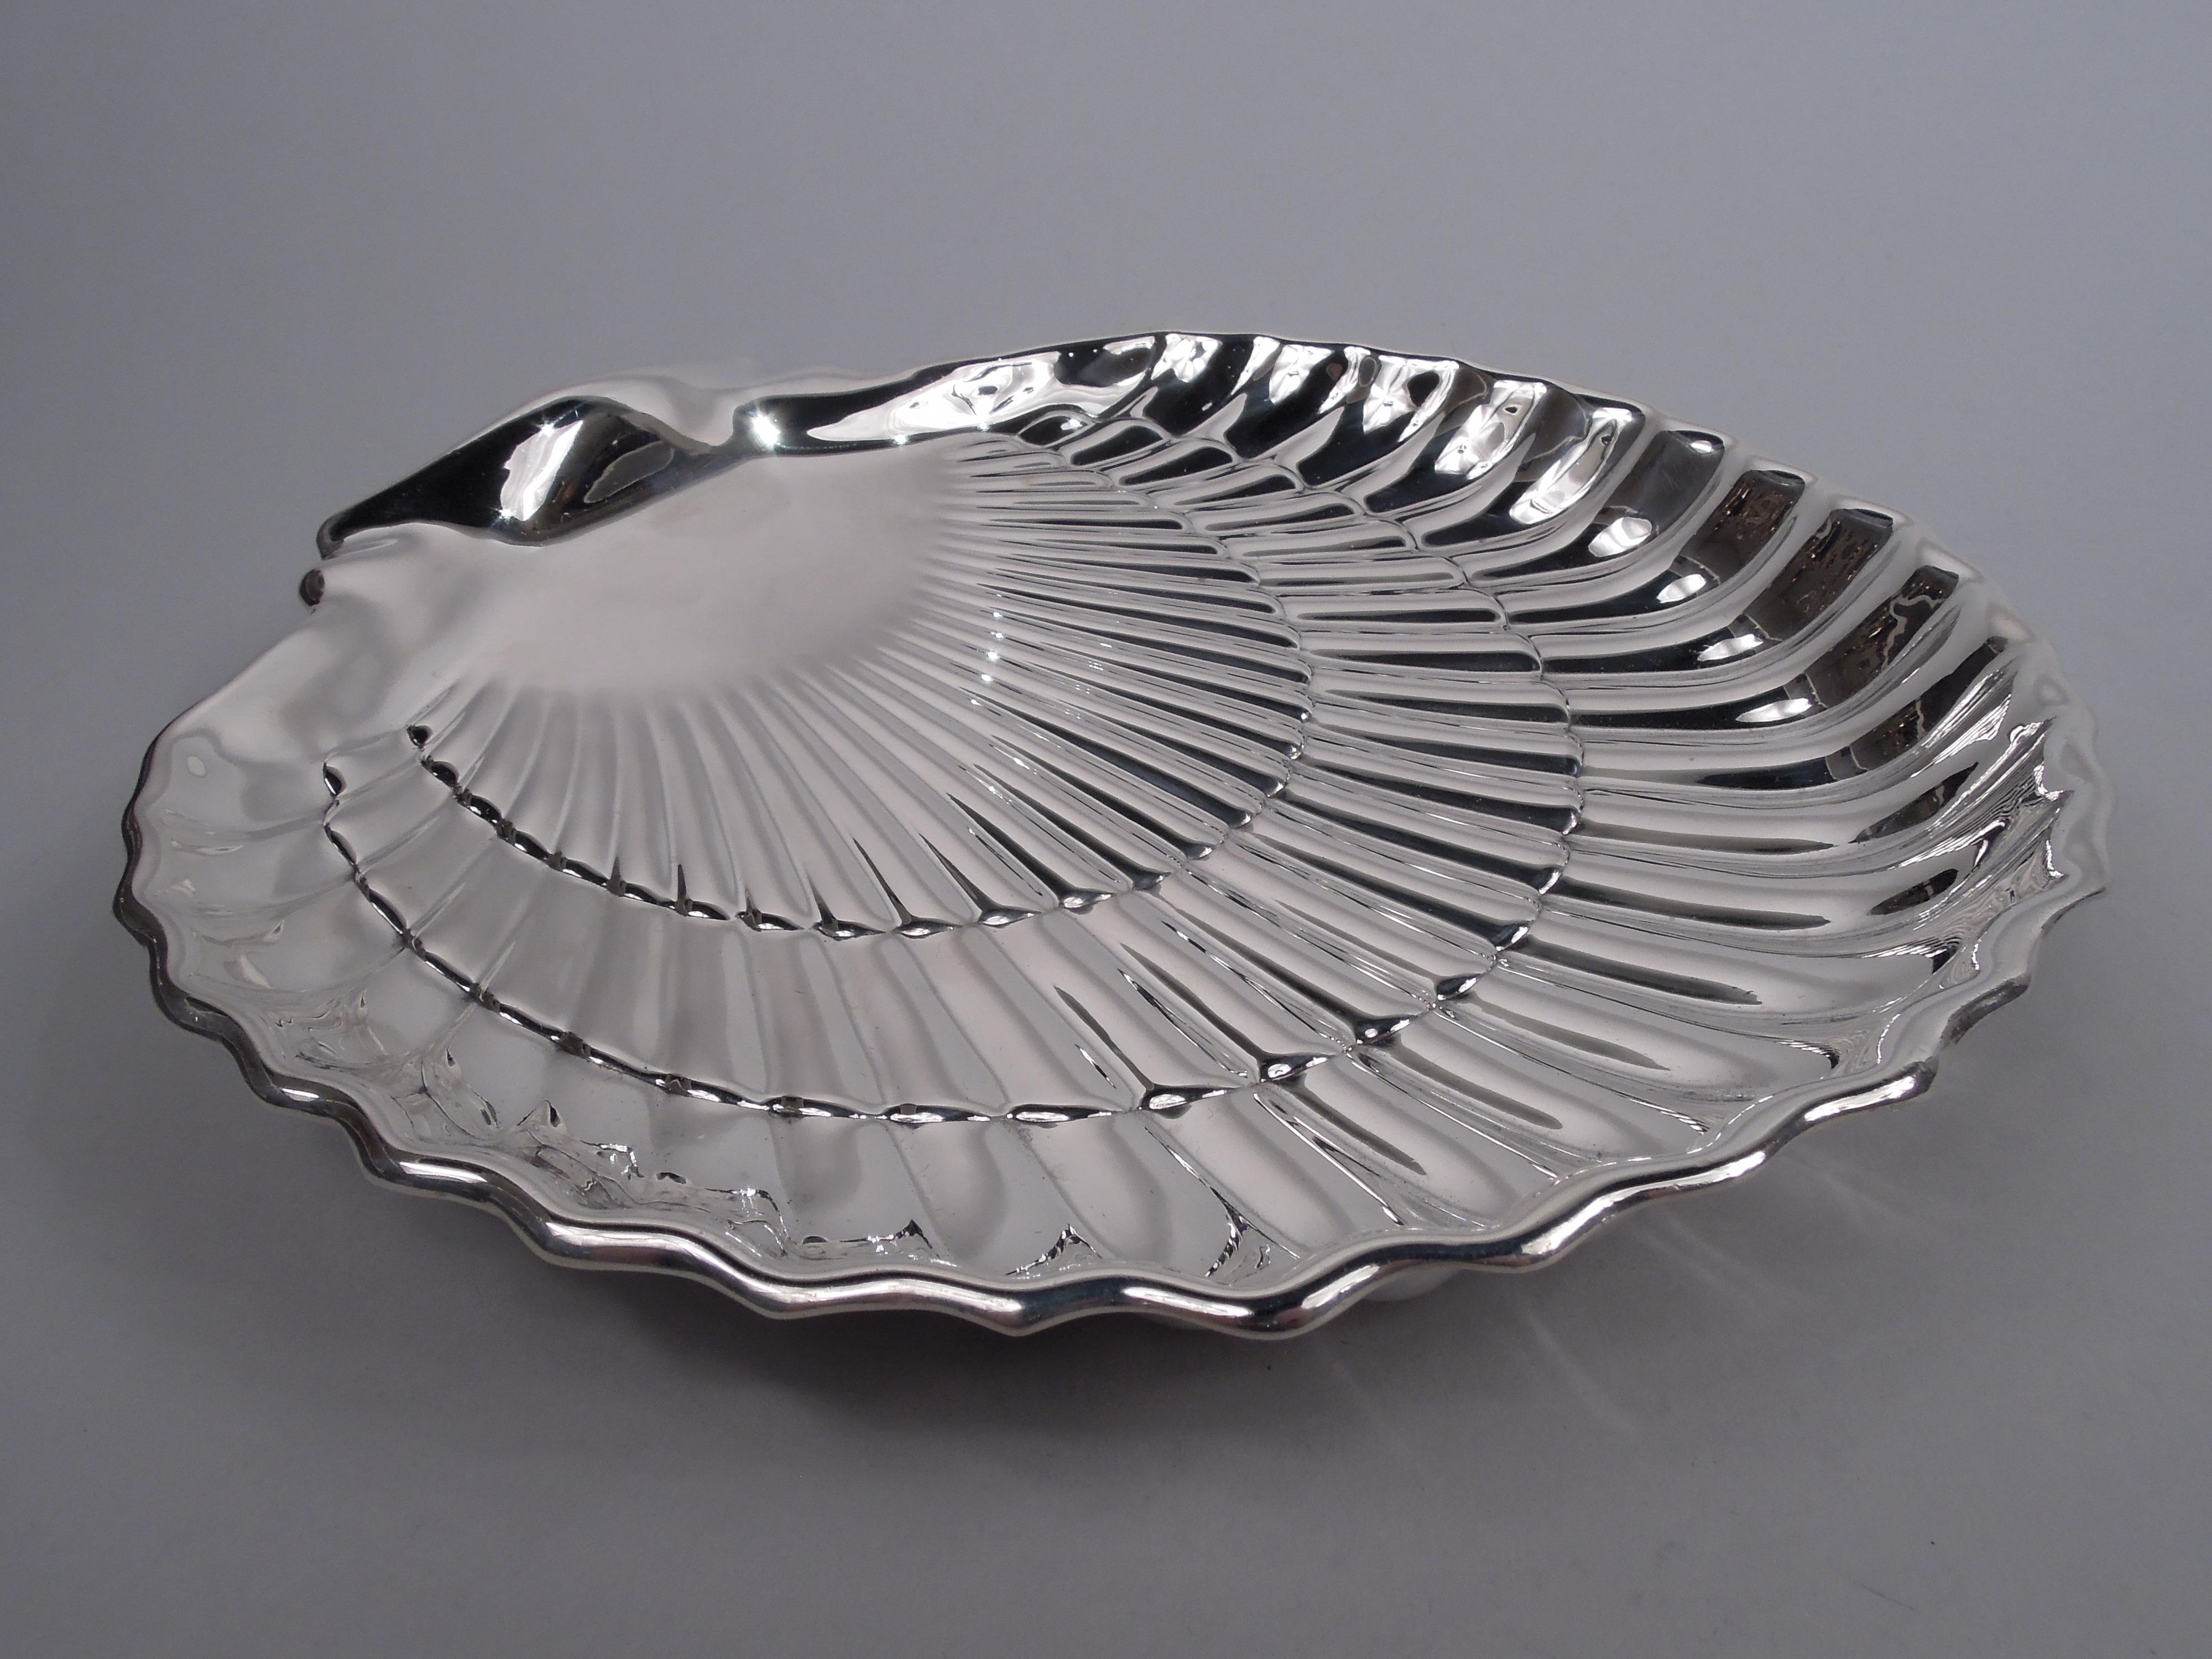 Large Gorham Modern Classical Sterling Silver Scallop Shell Dish, 1947 For Sale 1